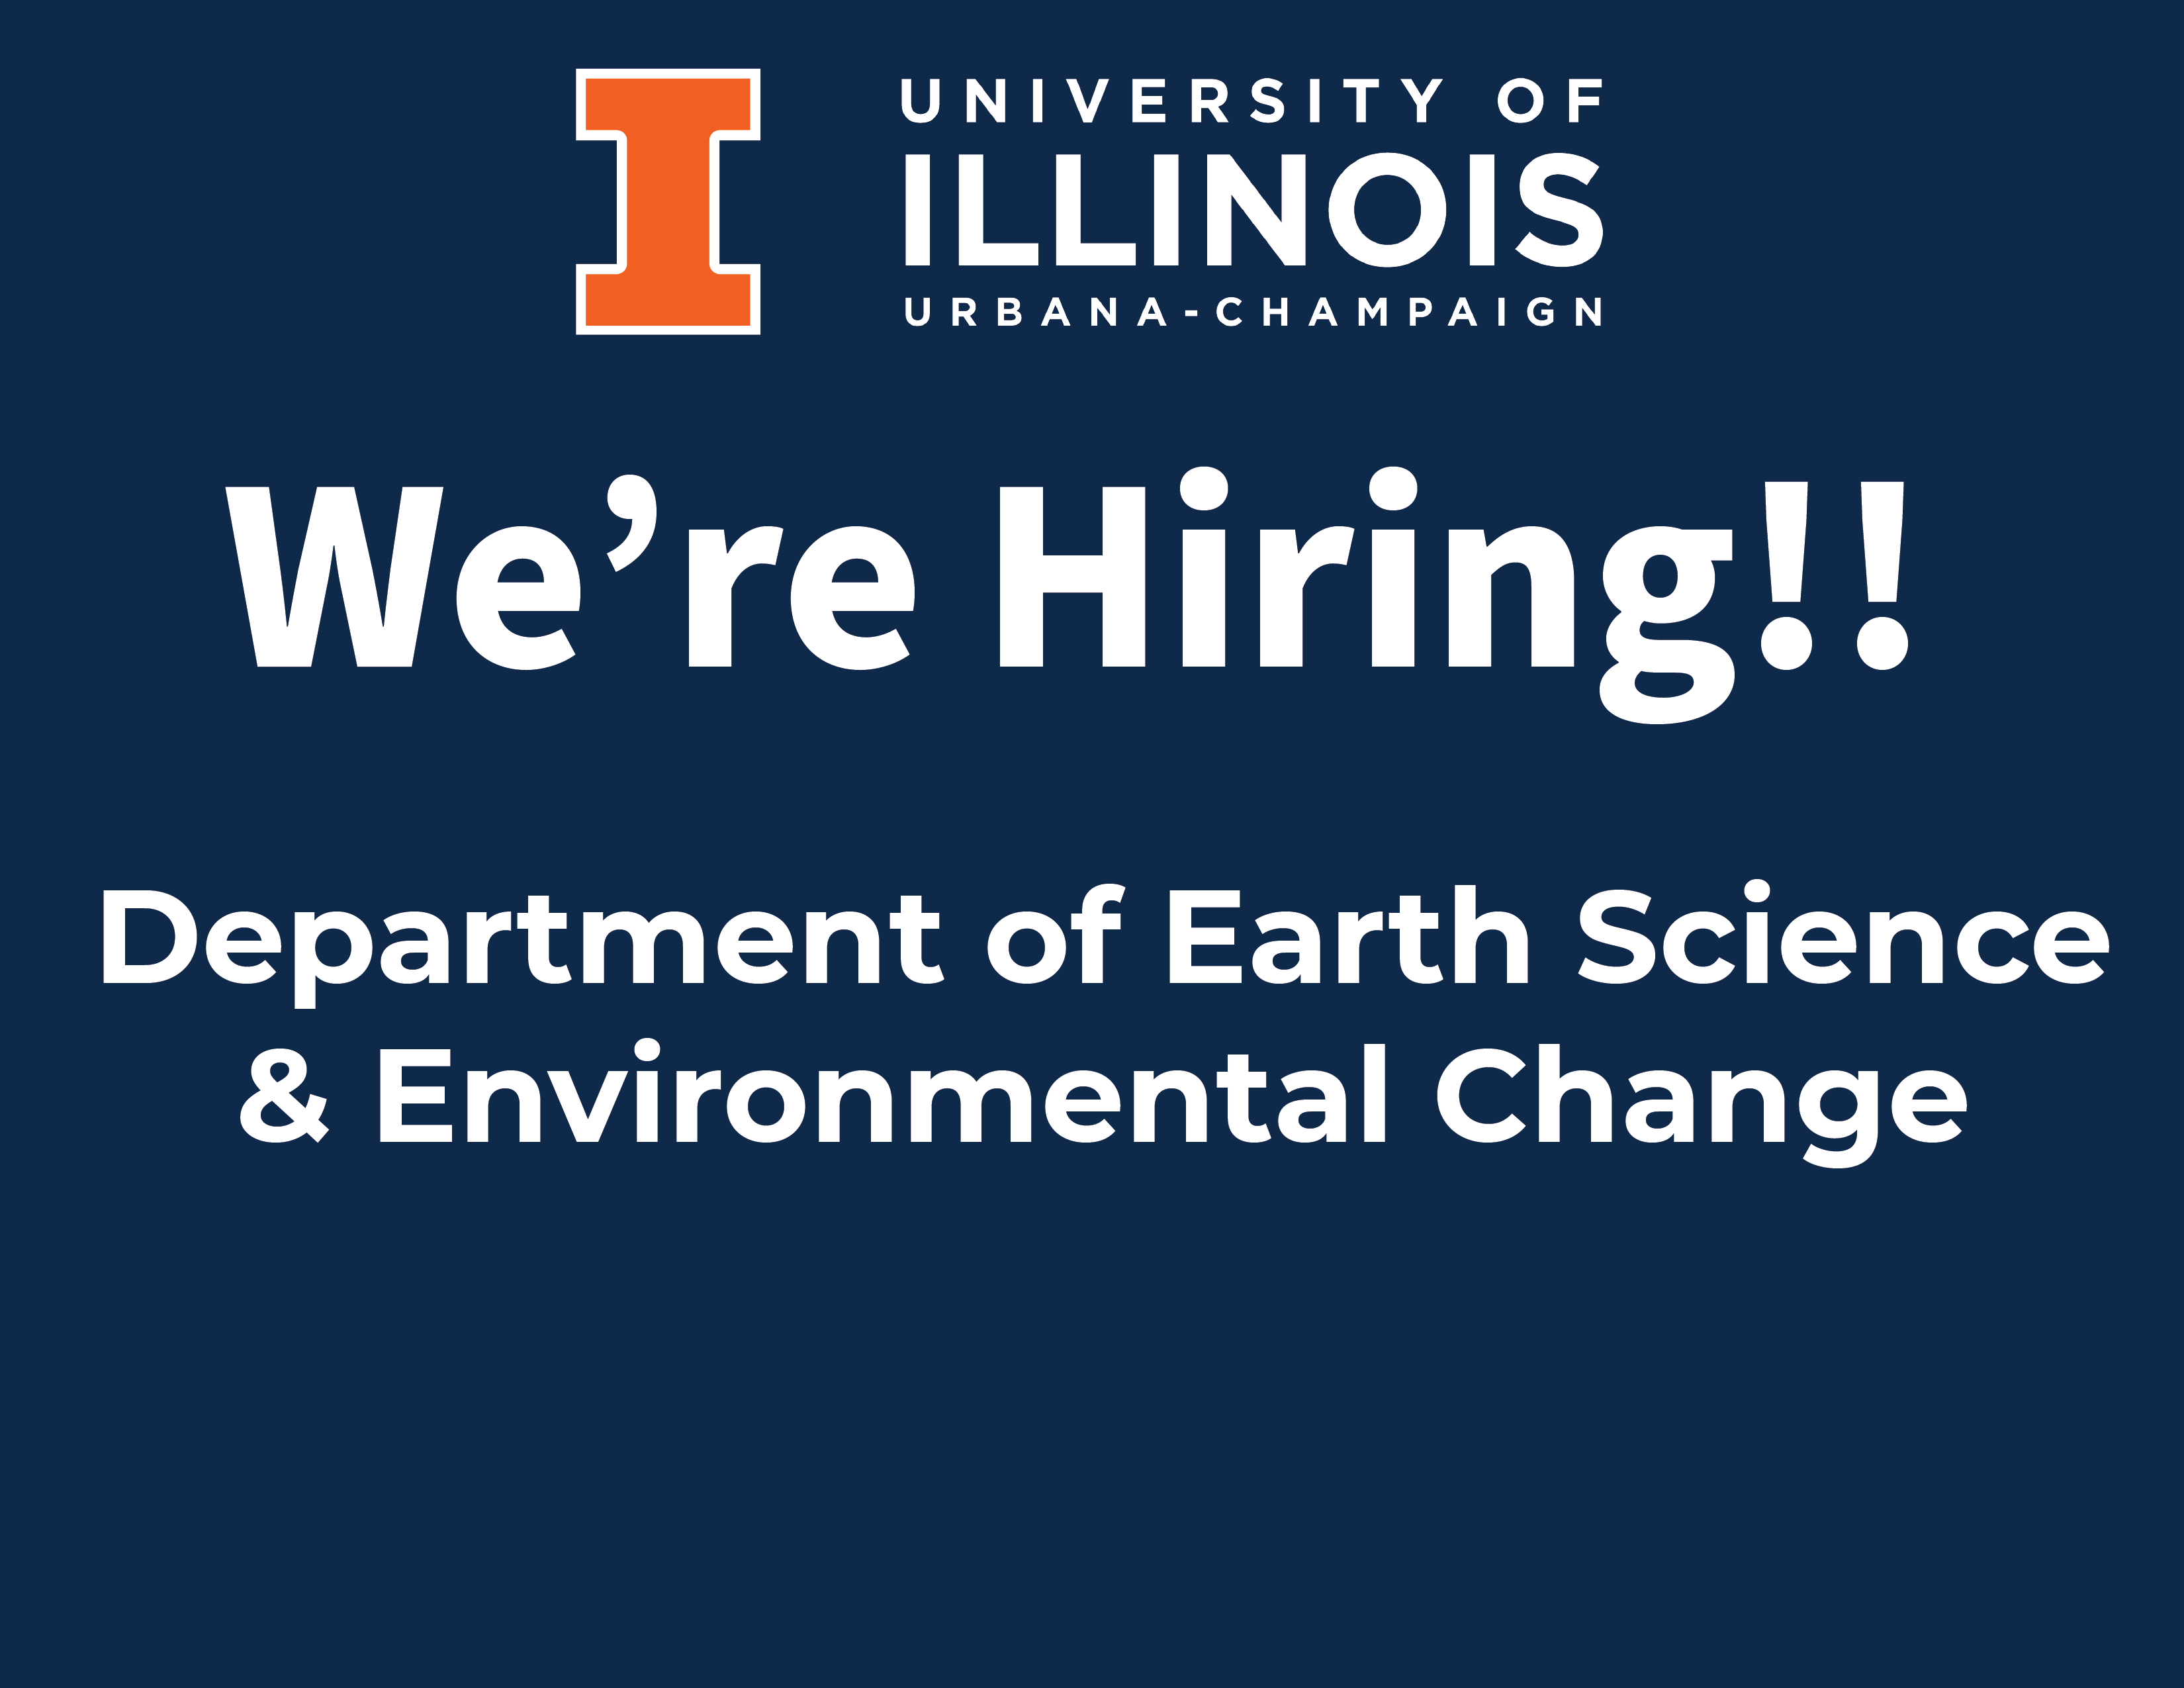 The department of Earth Science and Environmental Change is hiring